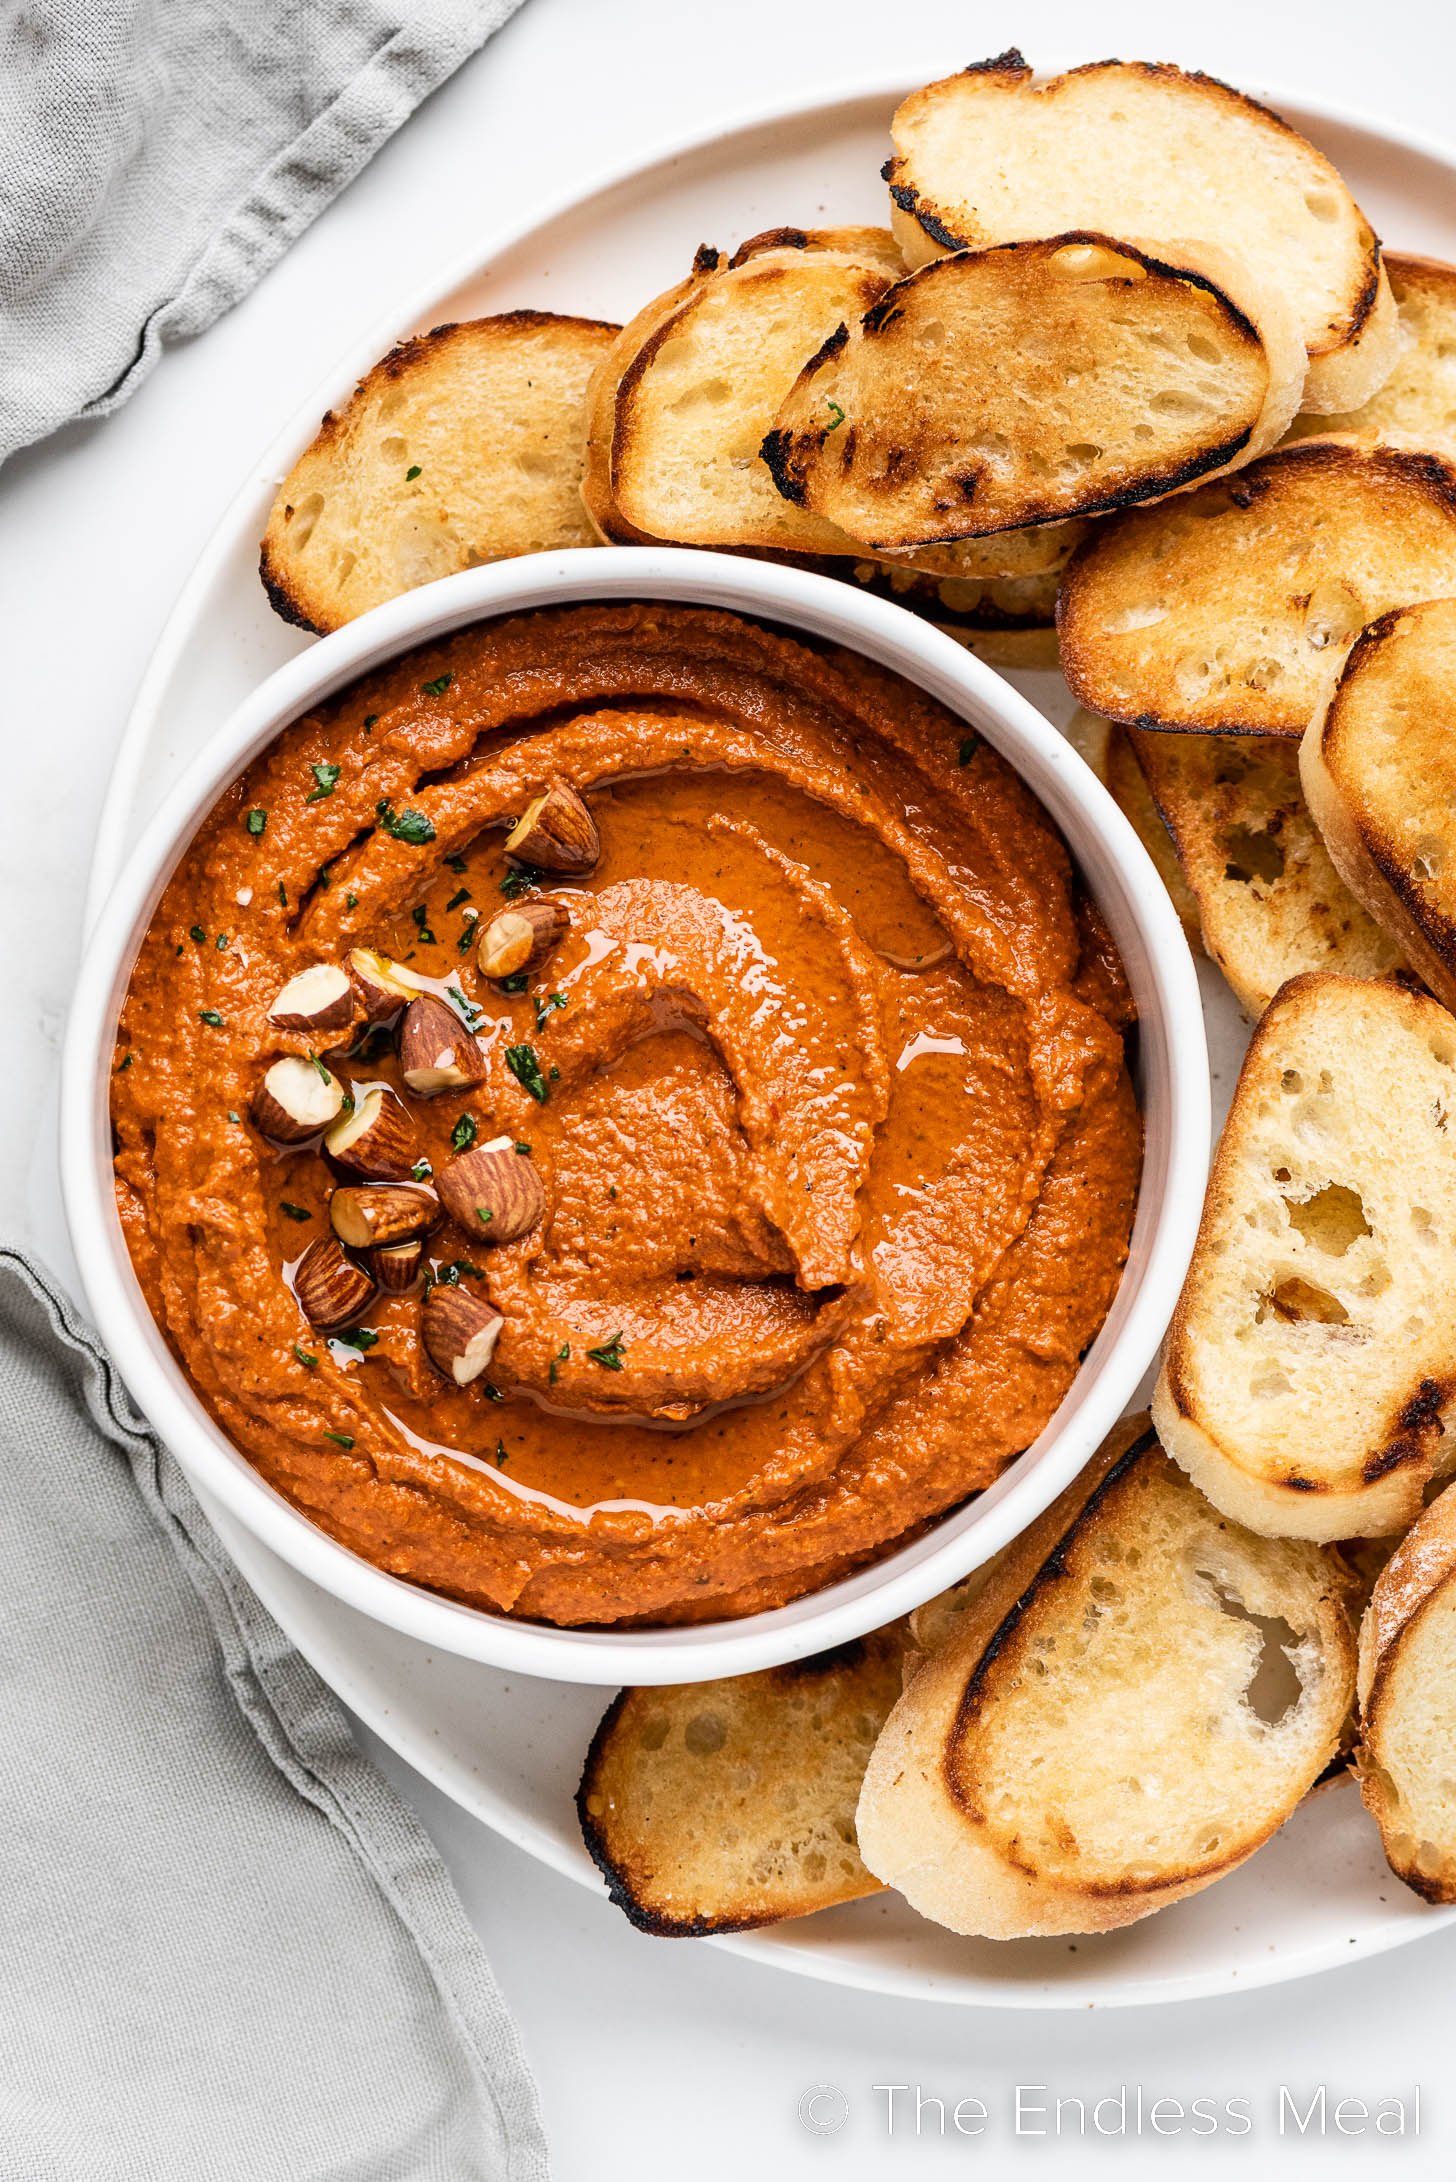 Romesco Sauce in a bowl surrounded by crostini bread